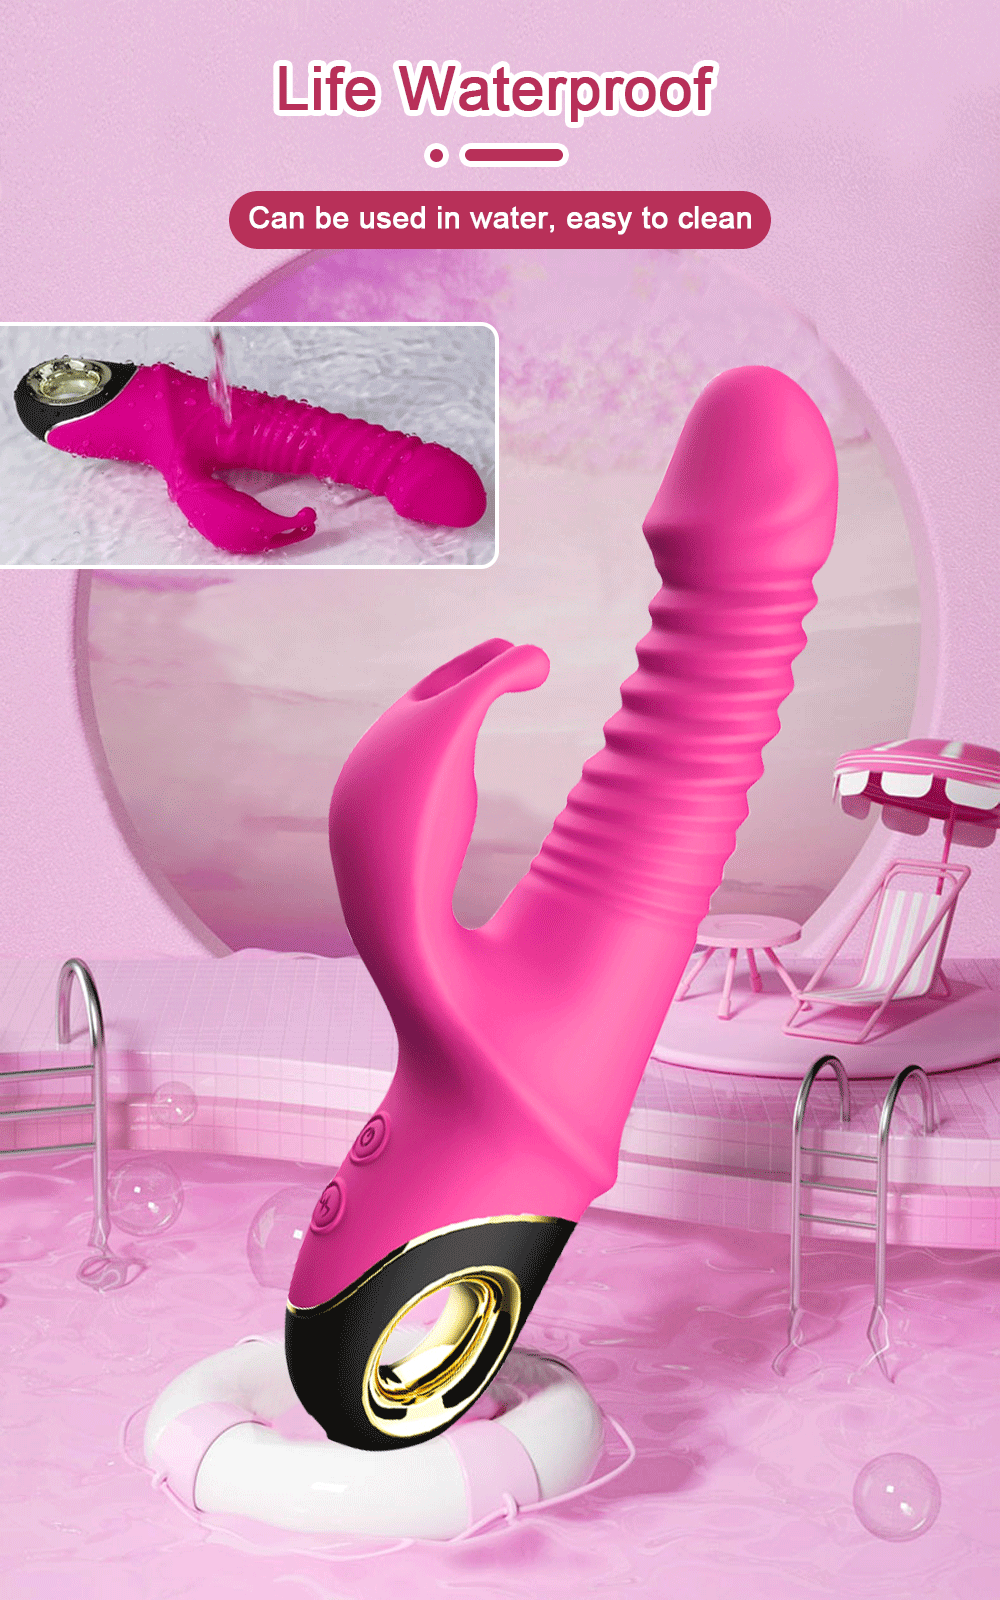 360° Rotating and Thrusting Vibrator with Clit Vibration V7